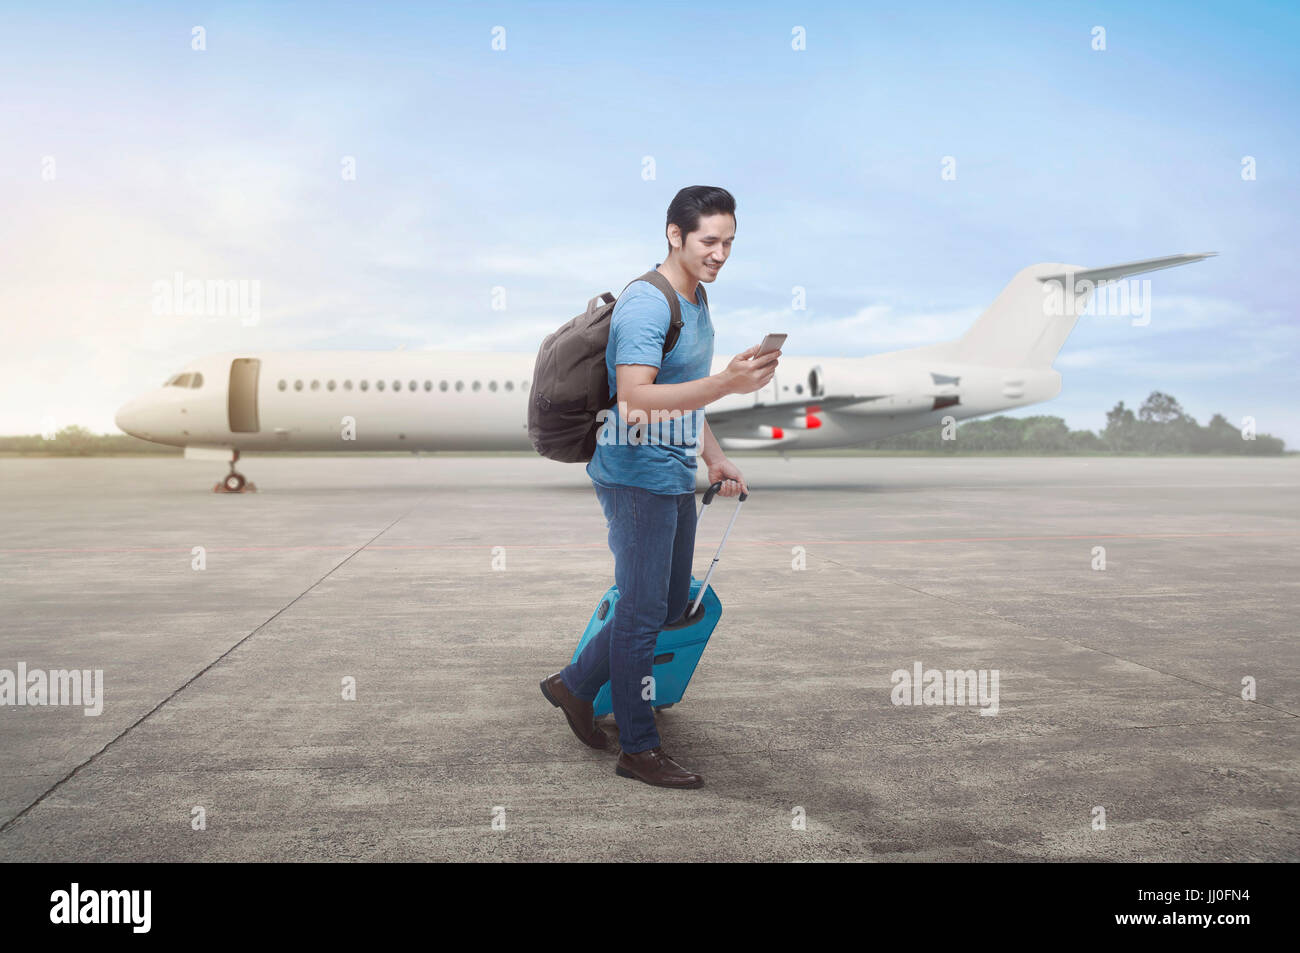 Young asian traveler walking with bags and cellphone on runway airplane Stock Photo